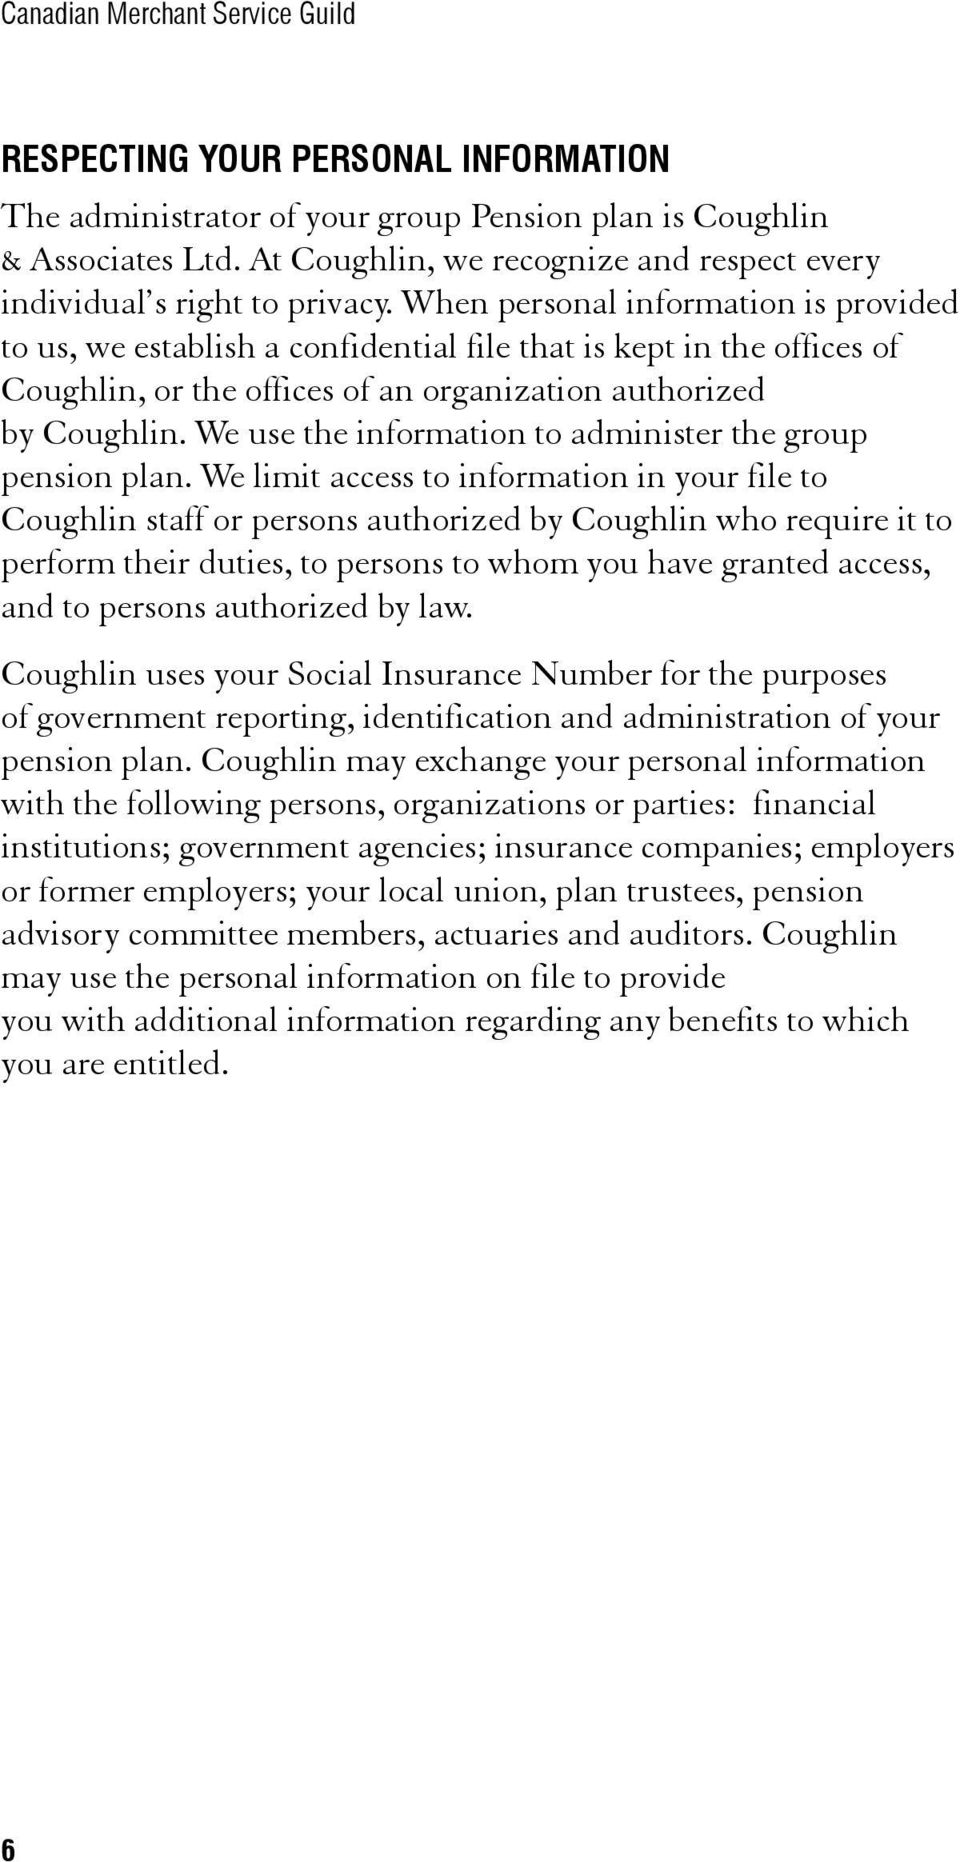 When personal information is provided to us, we establish a confidential file that is kept in the offices of Coughlin, or the offices of an organization authorized by Coughlin.